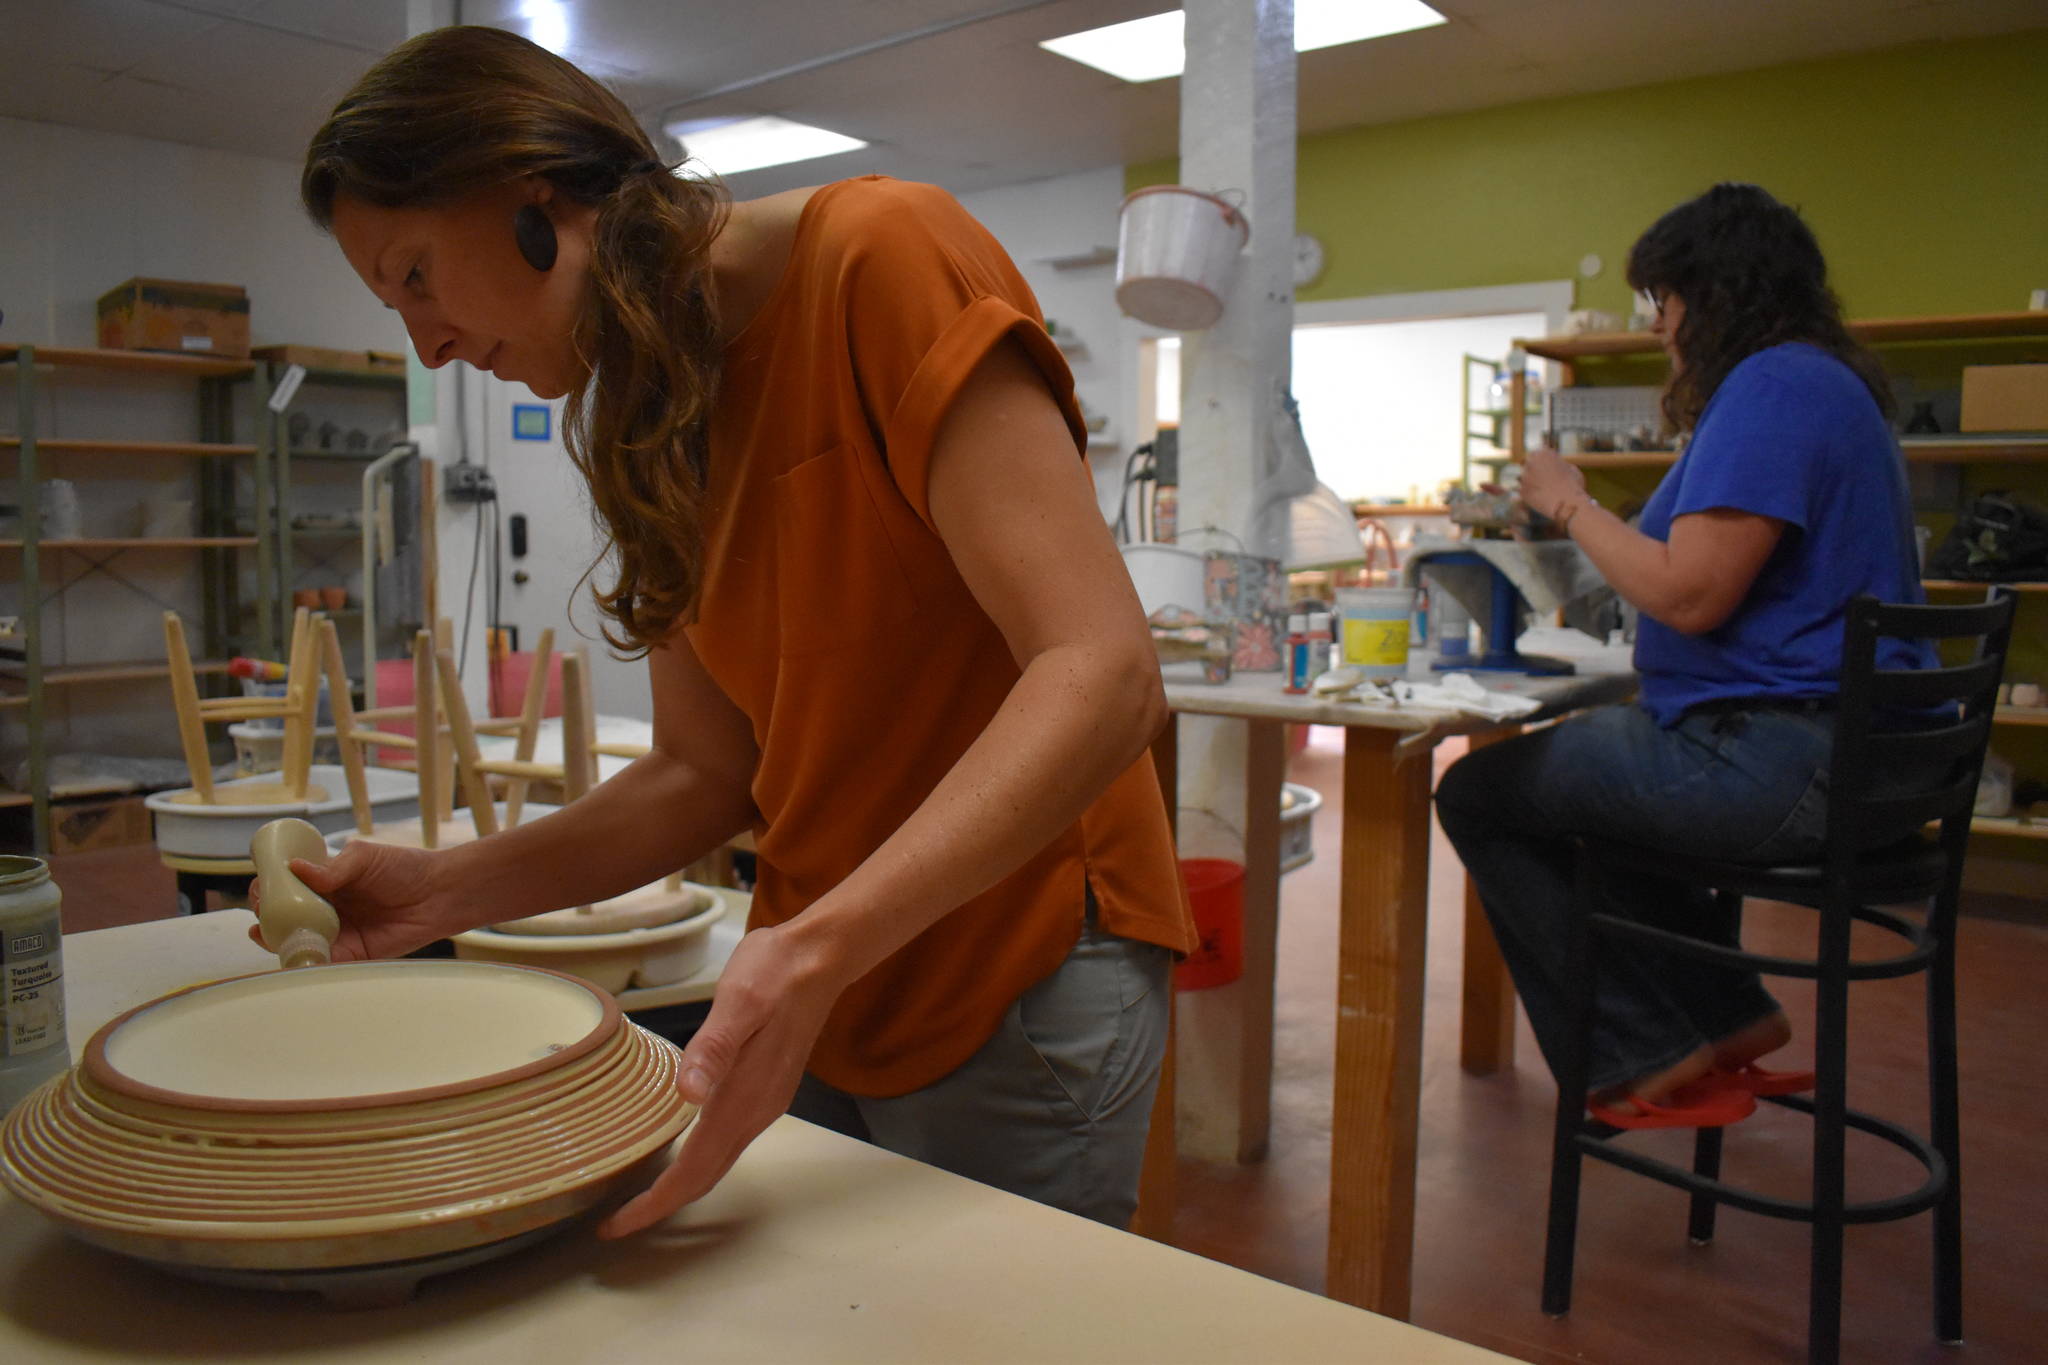 Cara Jung, left, and Tricia Vanslageren work on their art at Whidbey Clay Center in Freeland. The two will be joined by two more artists there during the Whidbey Working Artists Summer Open Studio Tour. (Photo by Emily Gilbert/Whidbey News-Times)